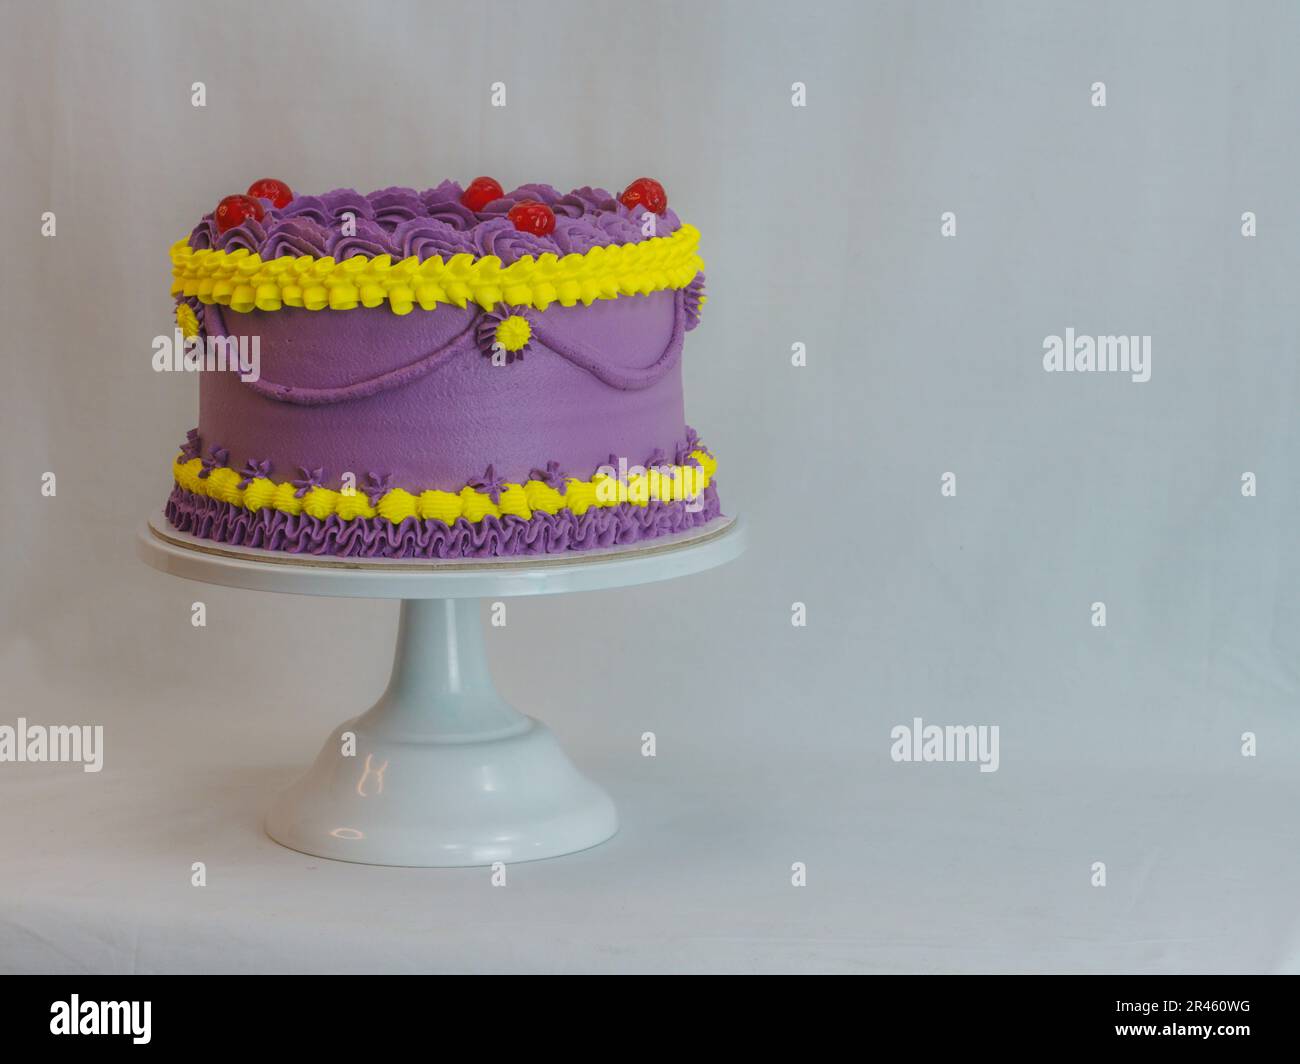 frosted icing violet yellow classic cilyndrical cake with text messagge topping on studio white background. Romantic layered cupcake. Stock Photo